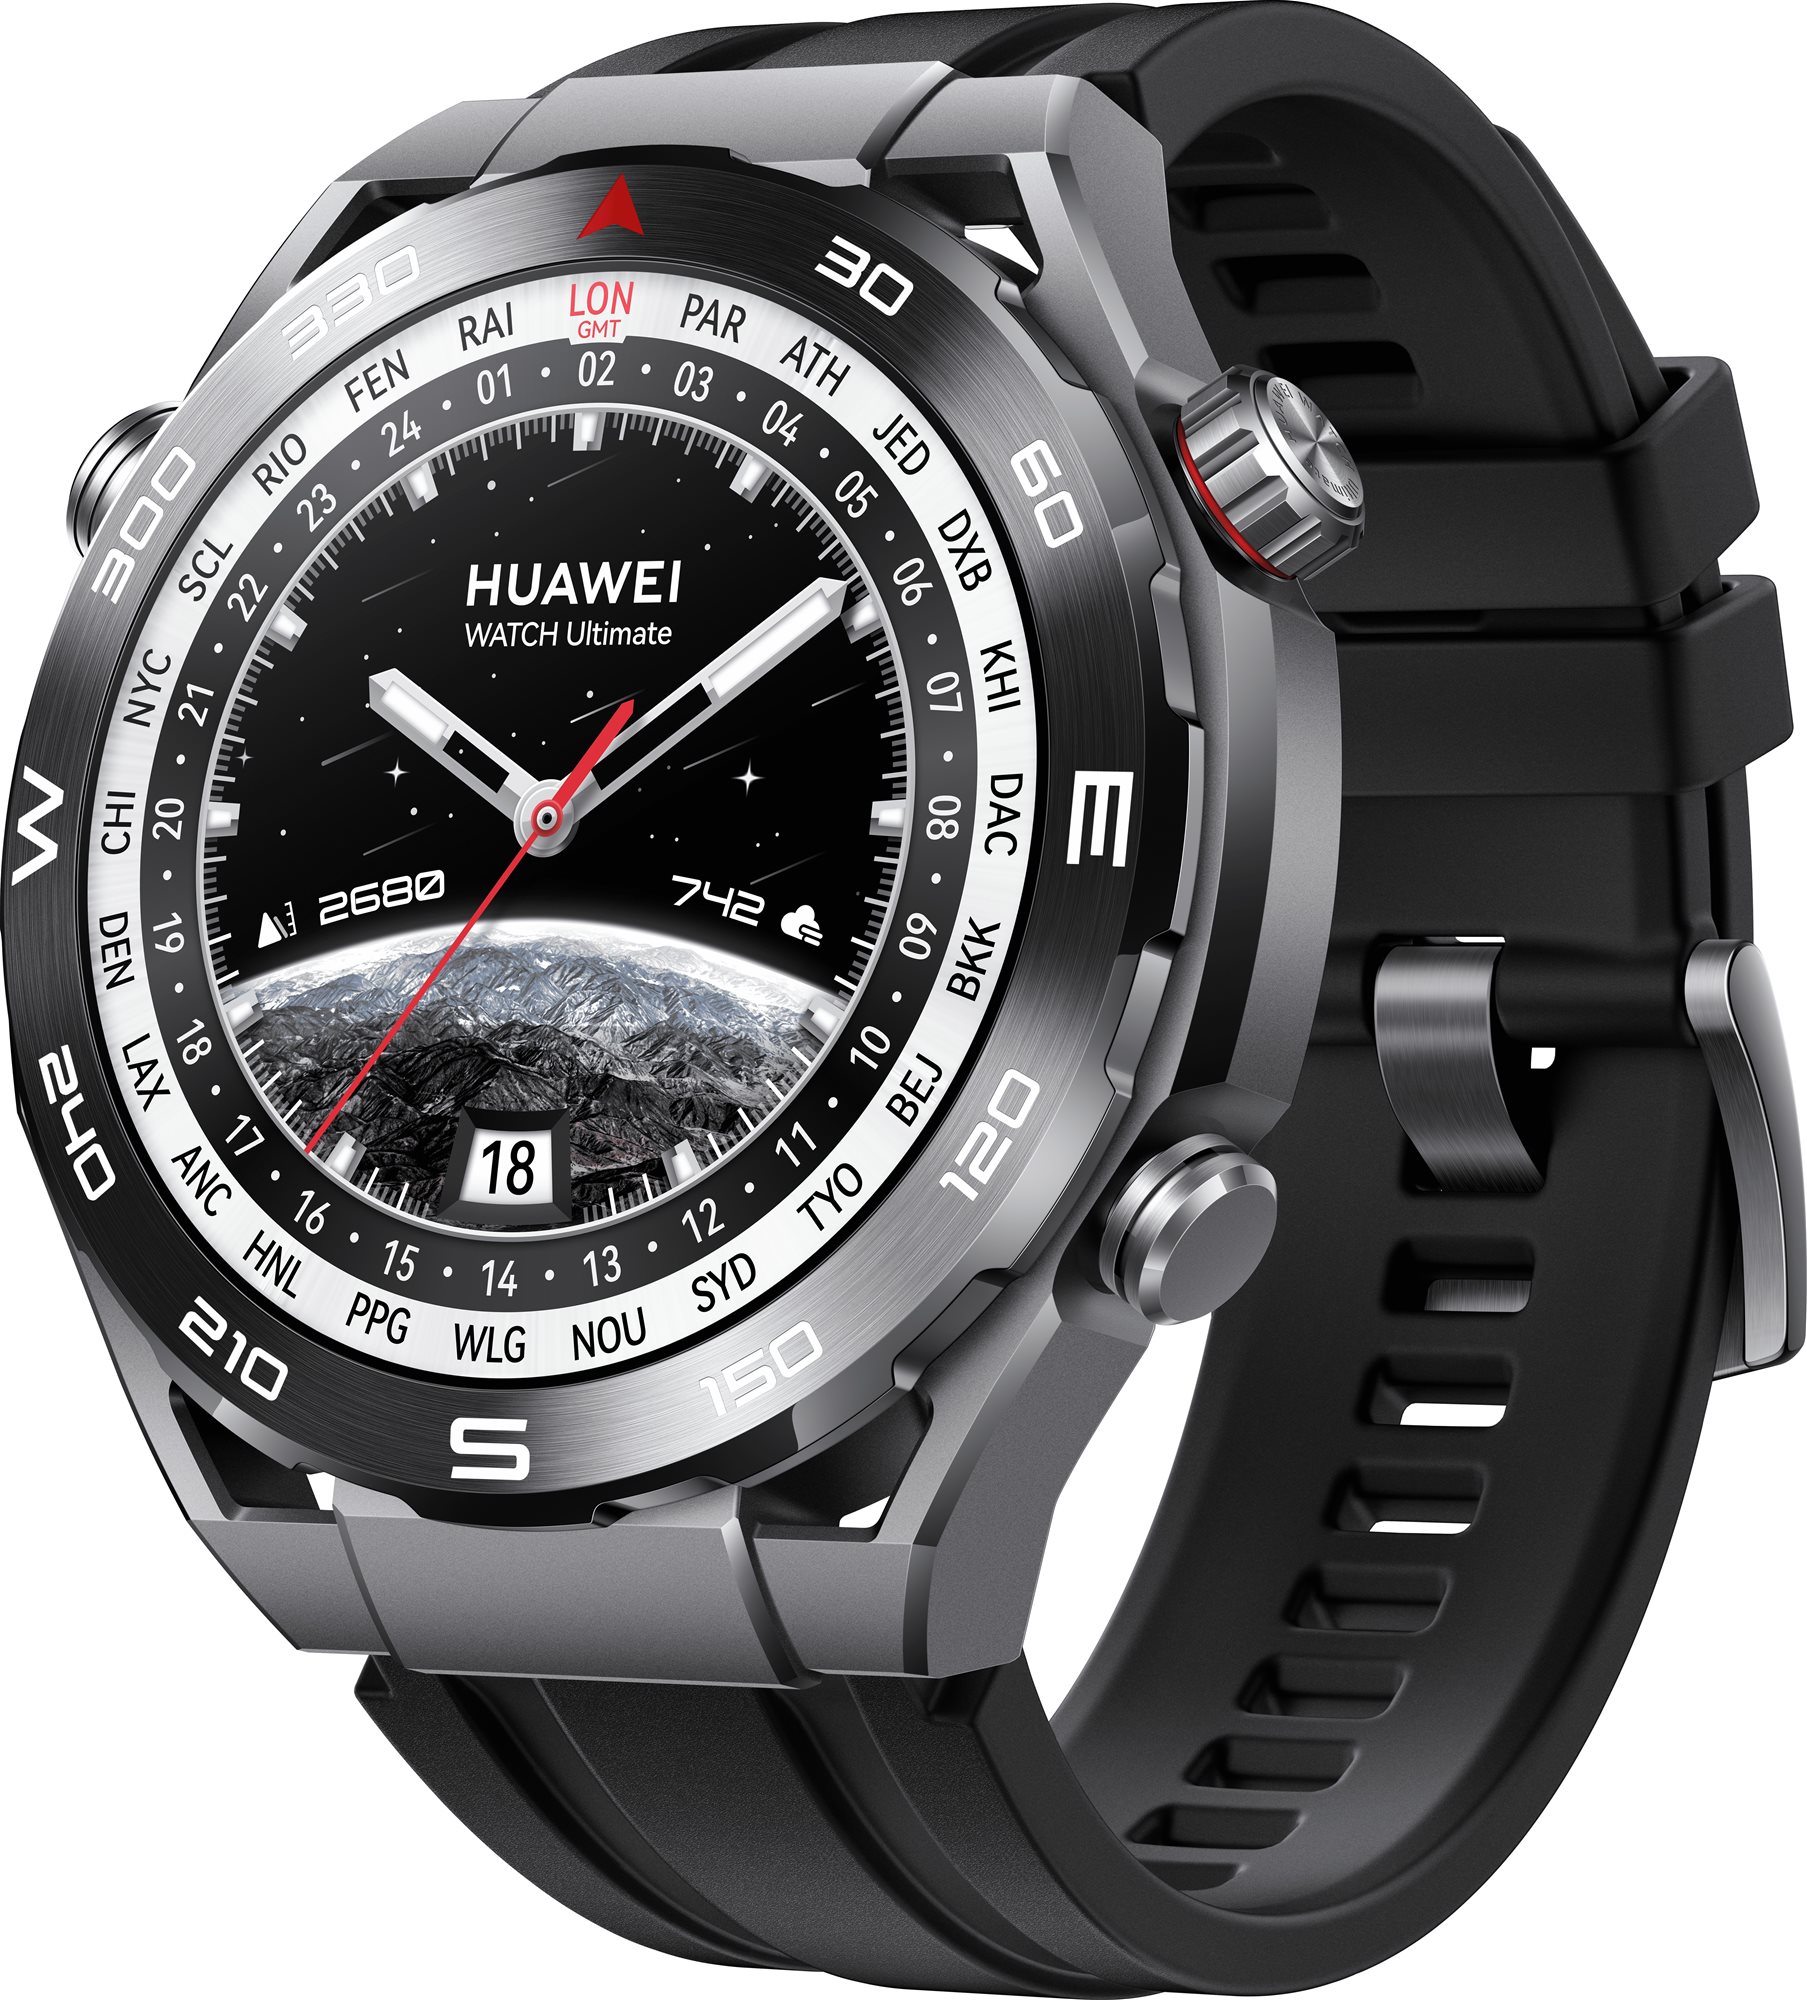 Huawei watch ultimate expedition black